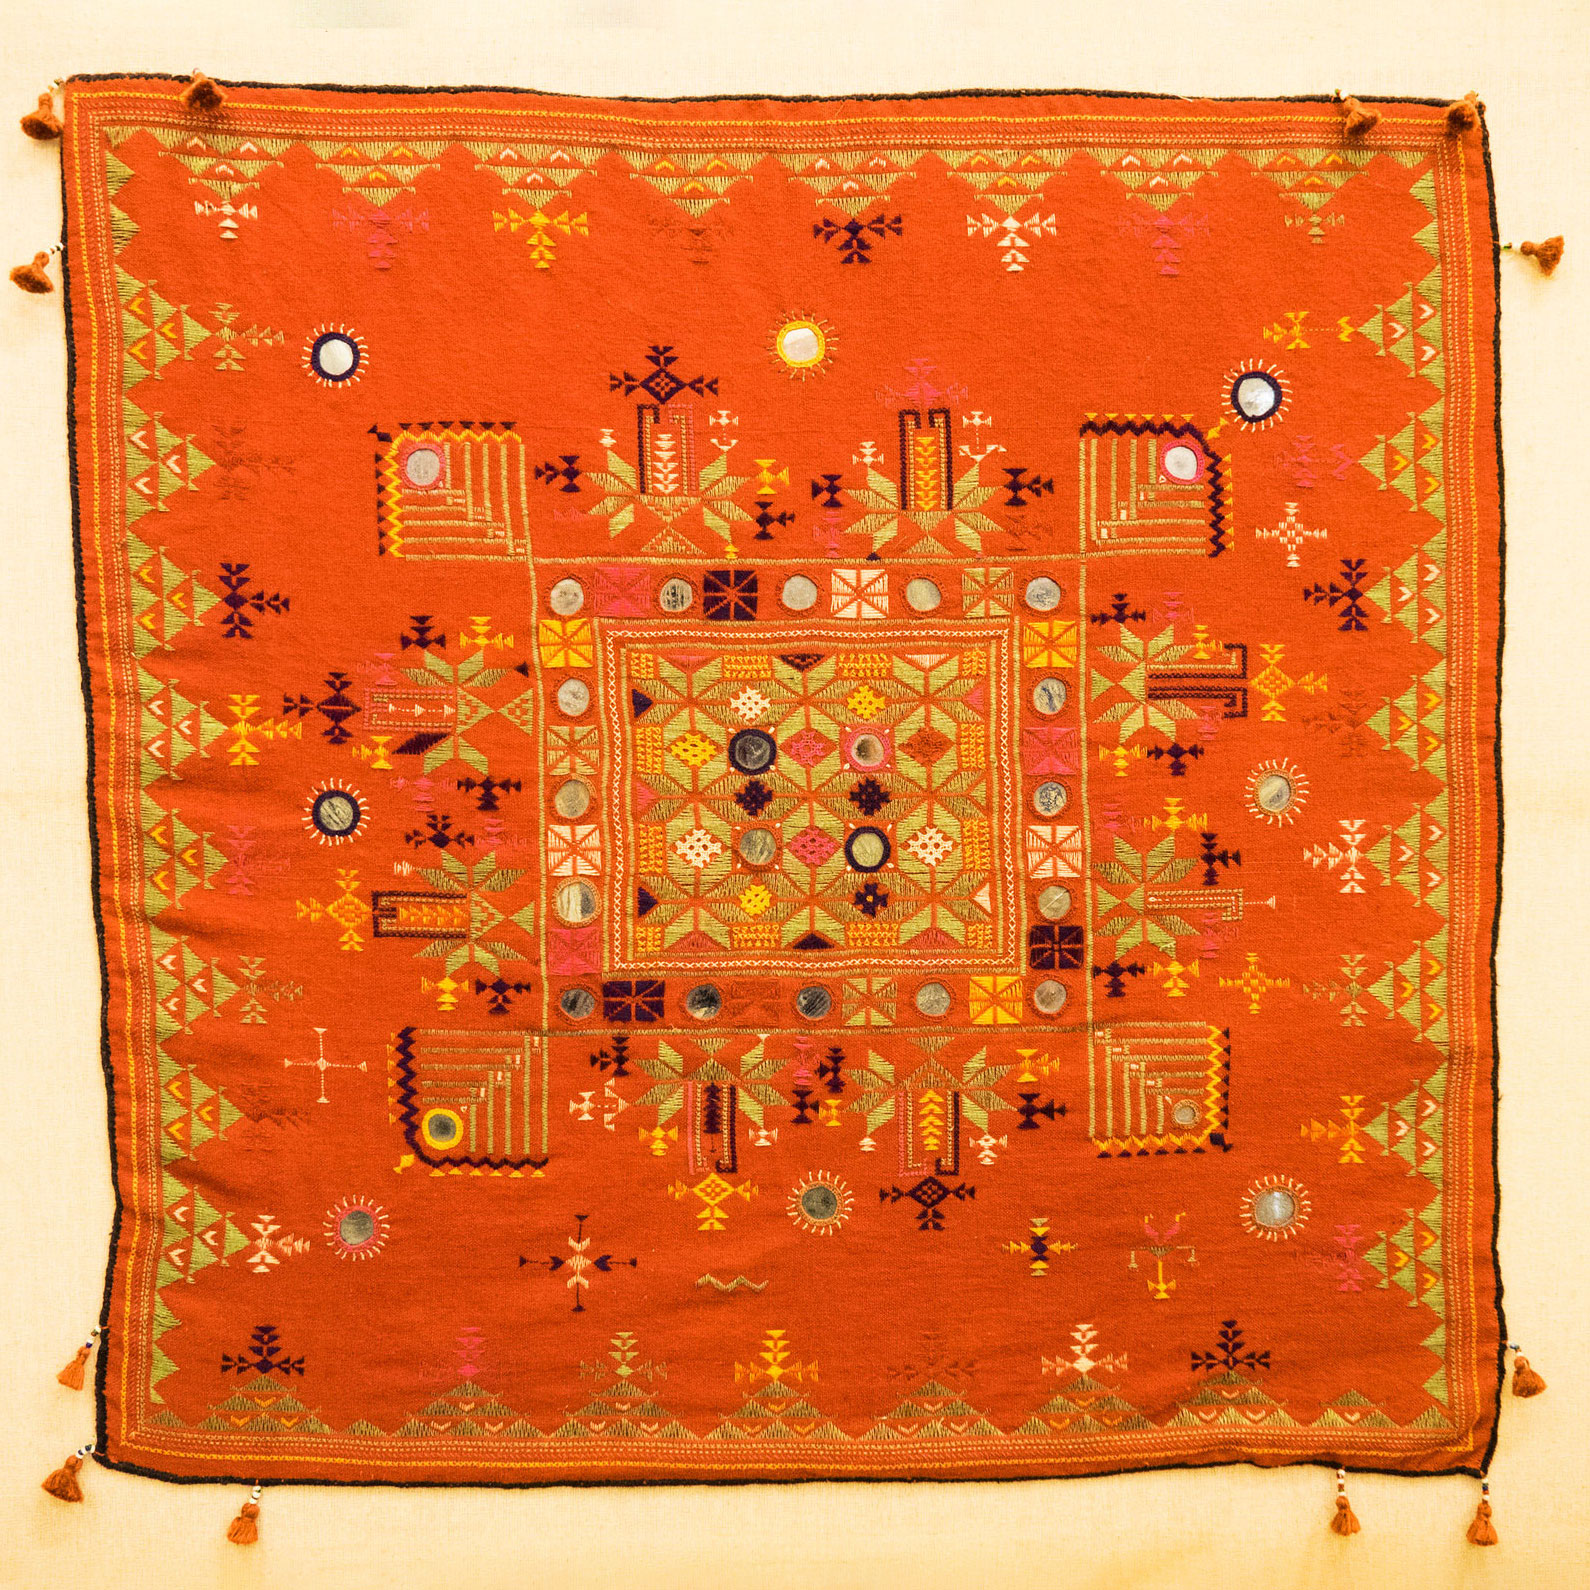 Orange cloth with intricate embroidery